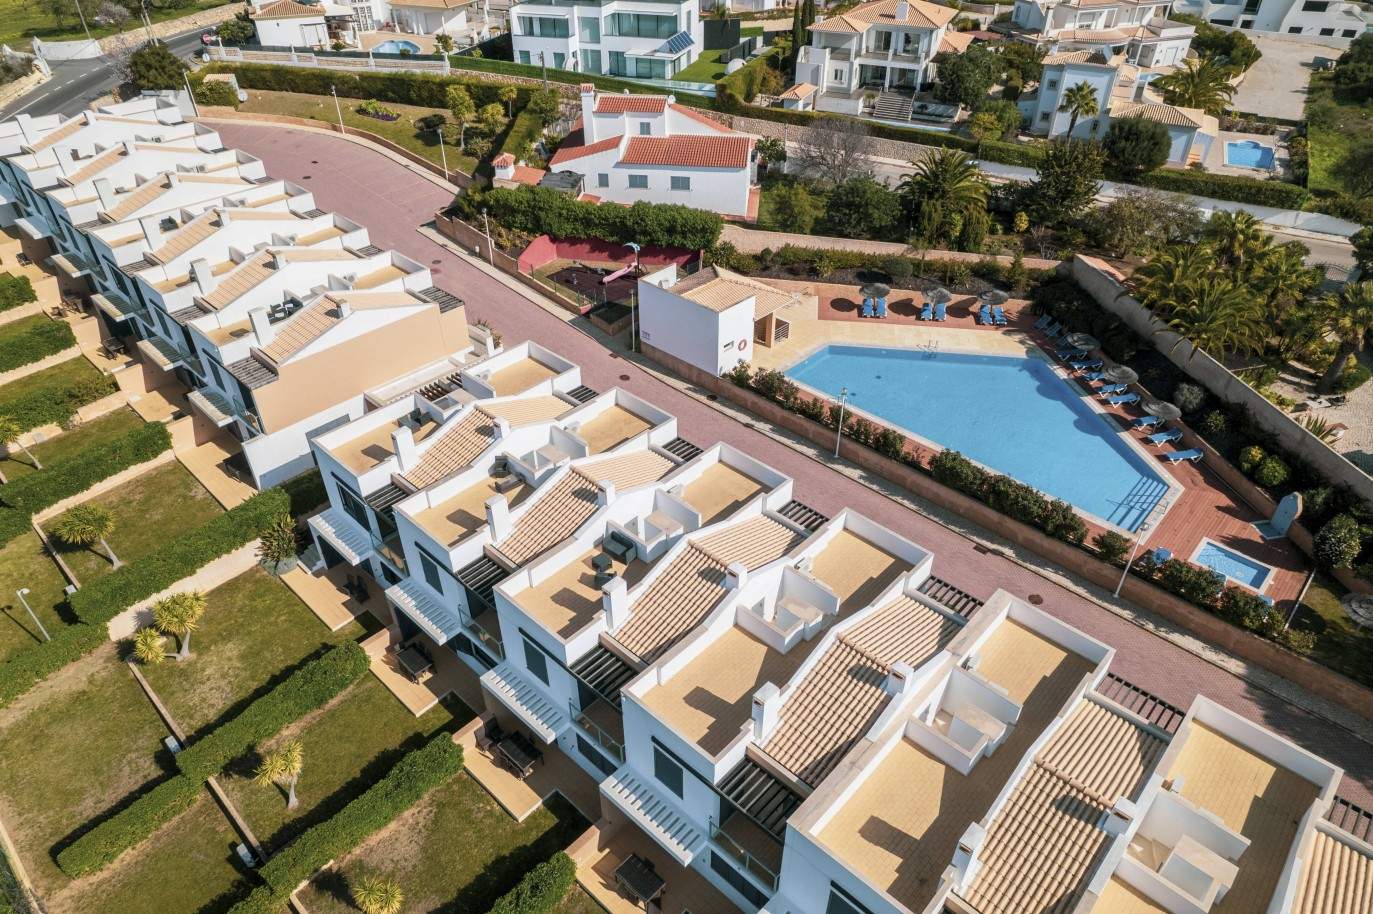 3 bedroom townhouses with sea view, for sale in Albufeira, Algarve_199644